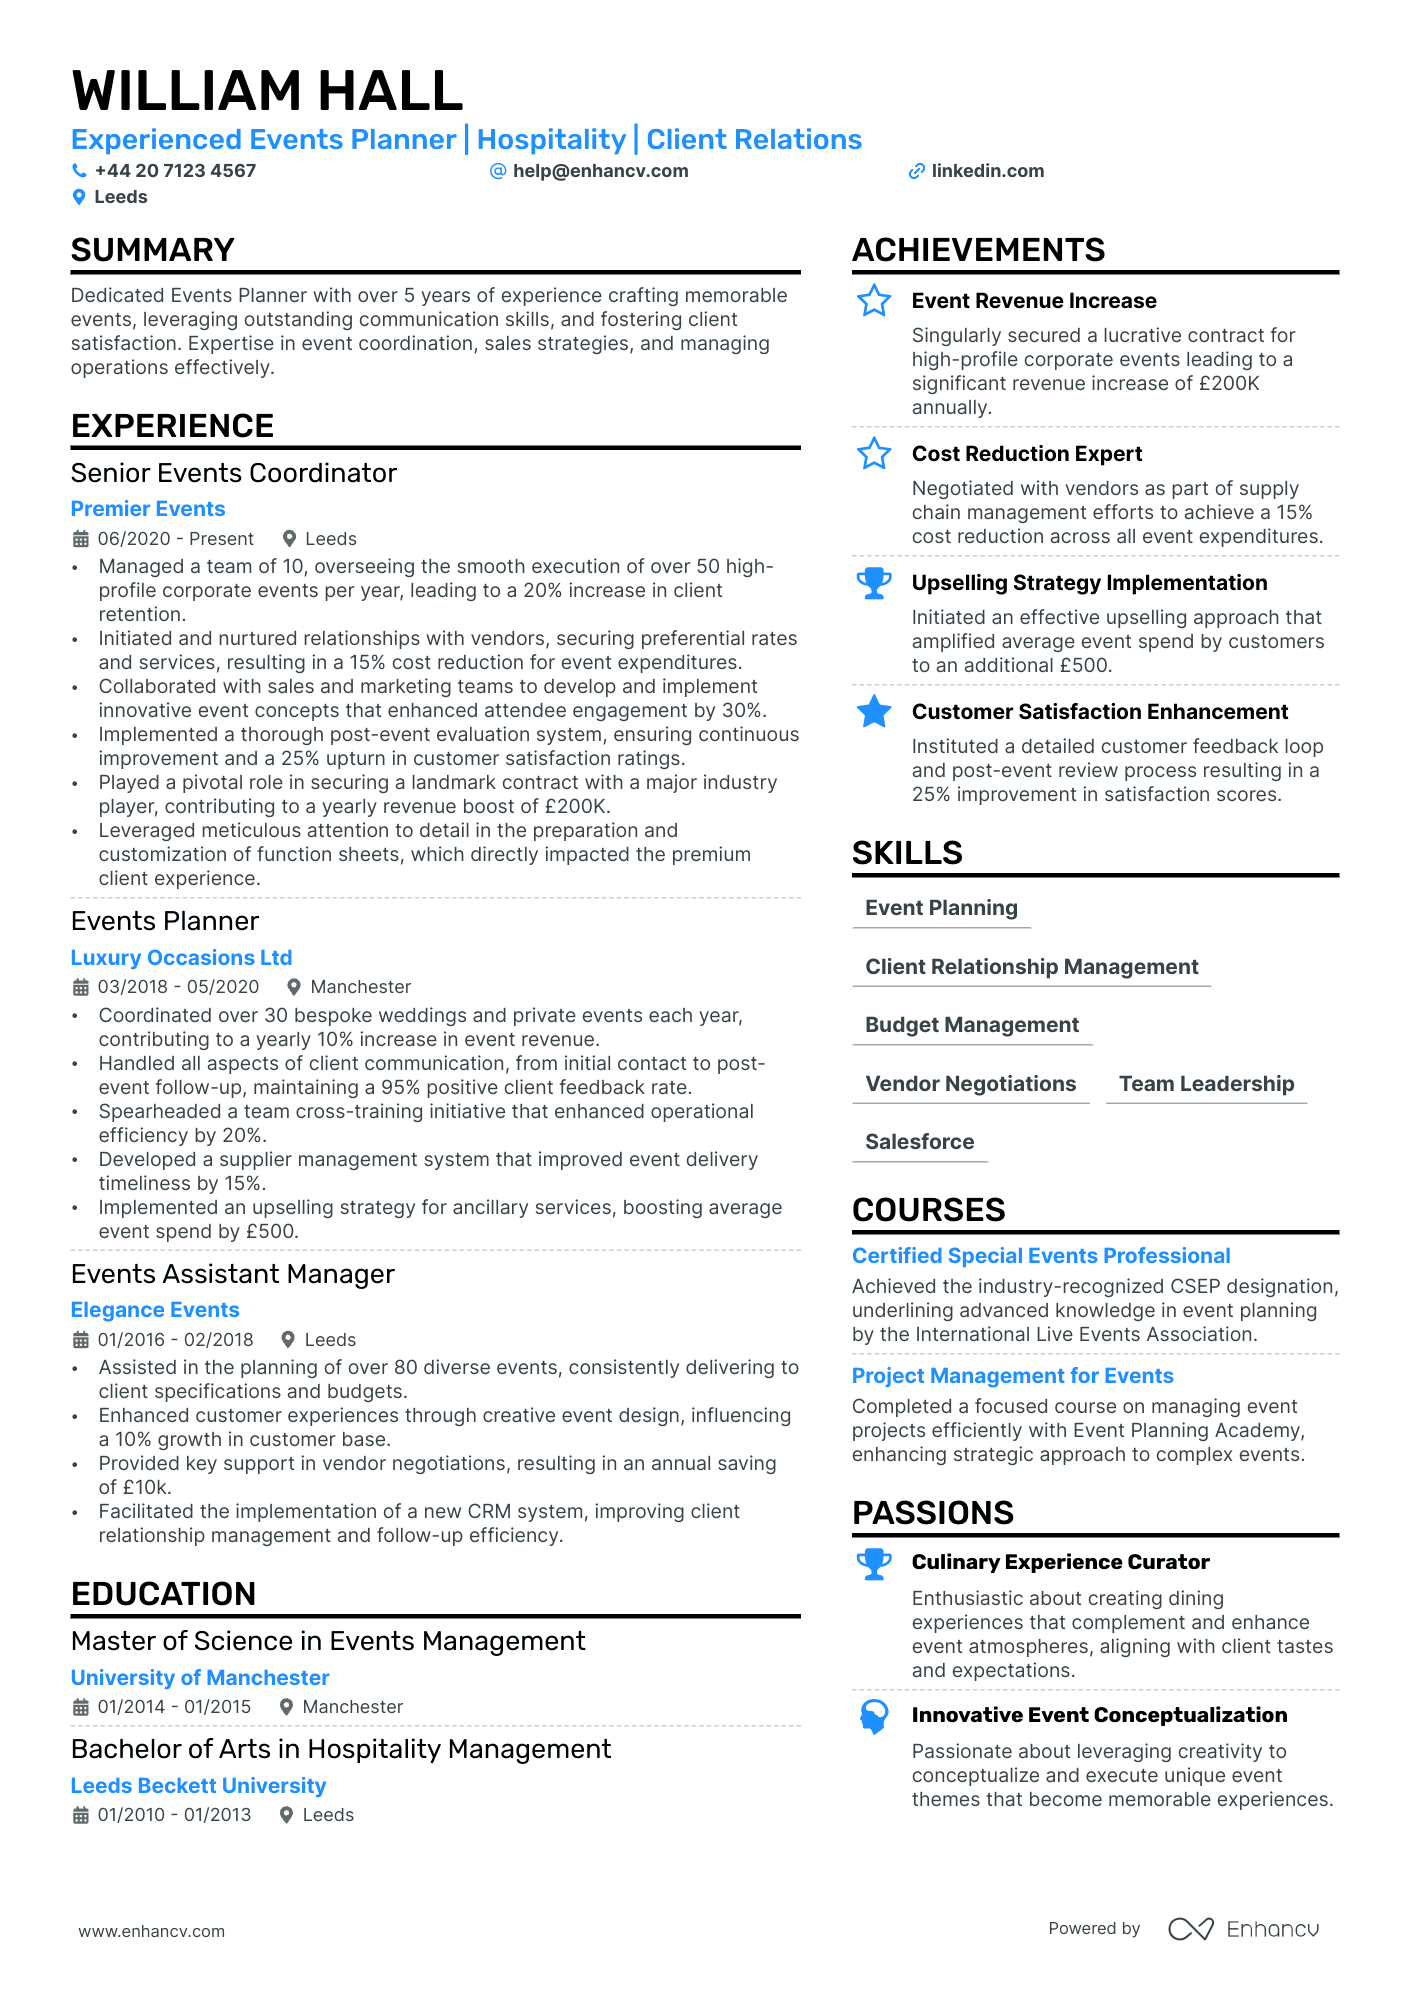 Event Planner cv example